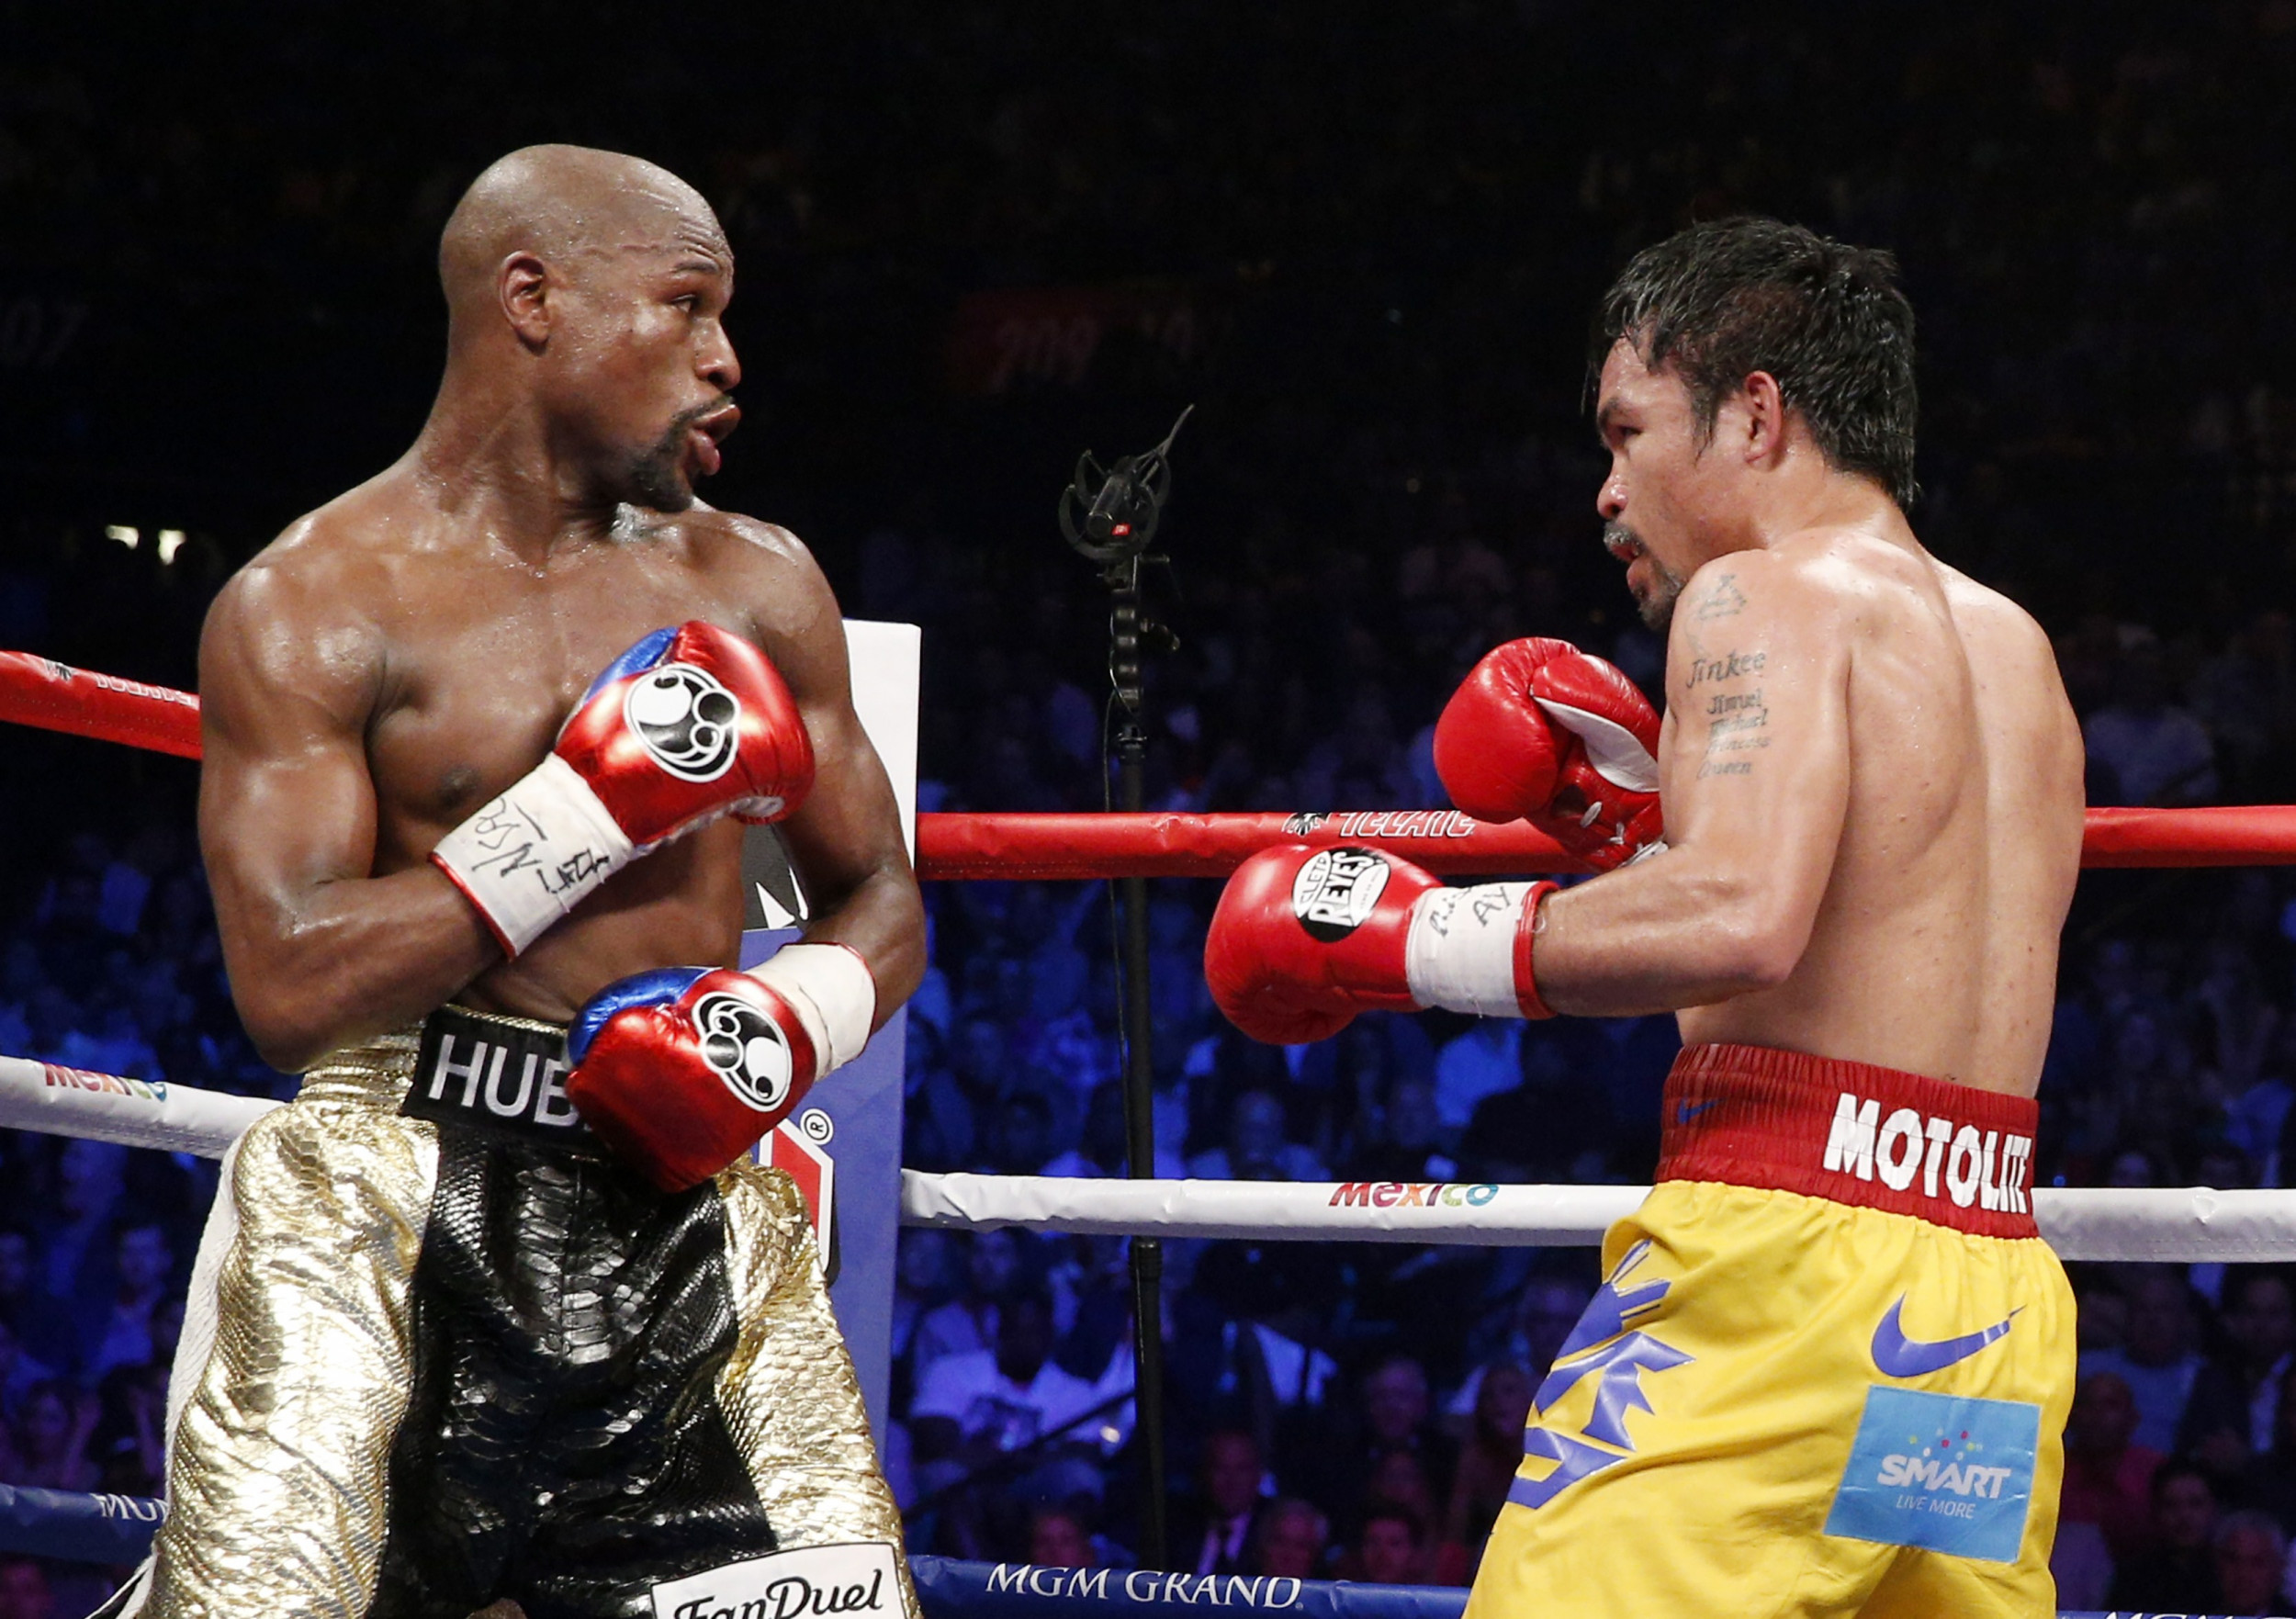 Floyd Mayweather Vs Manny Pacquiao Rematch Could Be On The Cards After Fighters Trade Barbs On Social Media